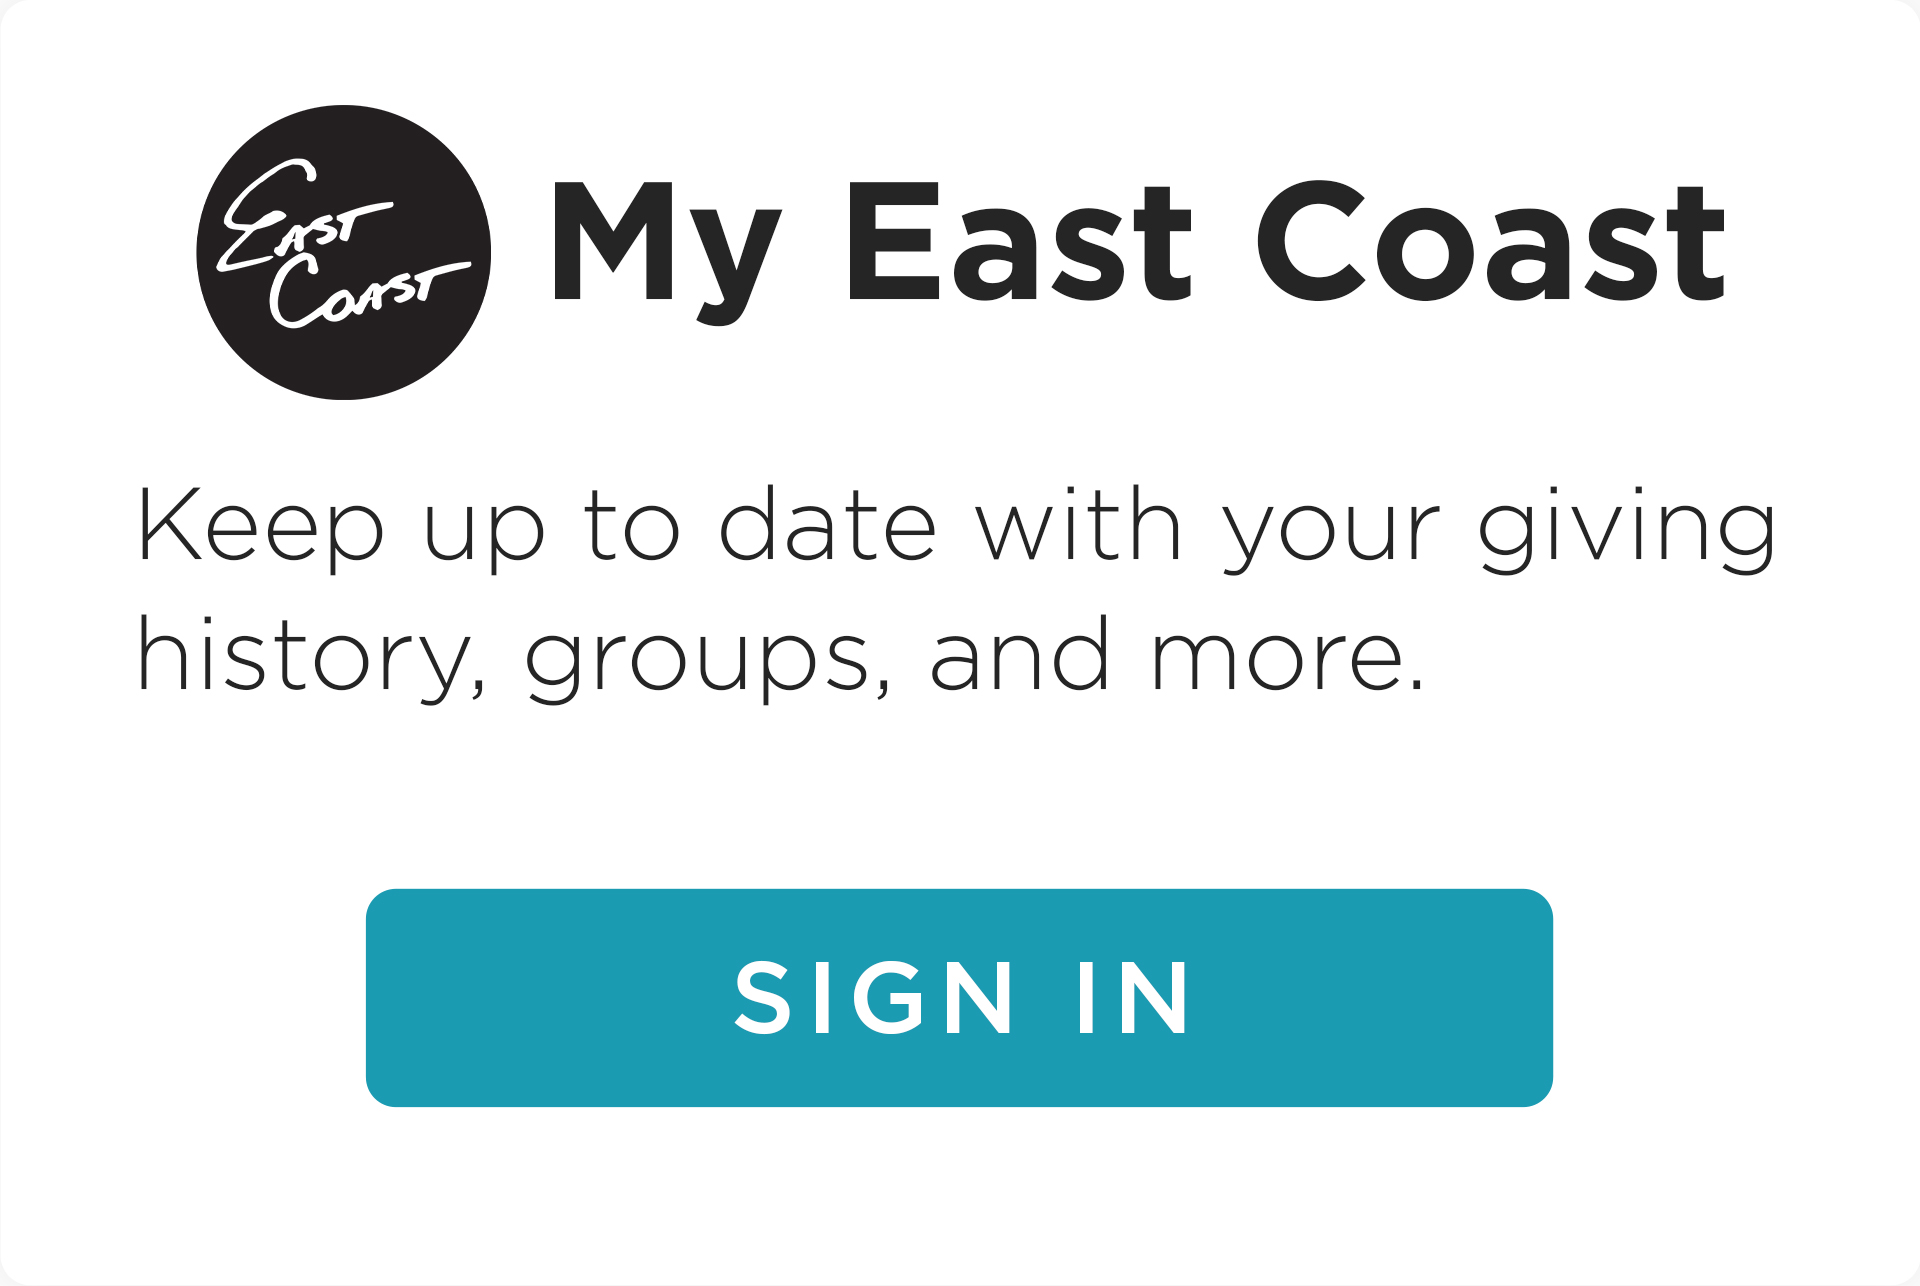 Sign in to My East Coast to keep up to date with your giving, history, groups, and more.